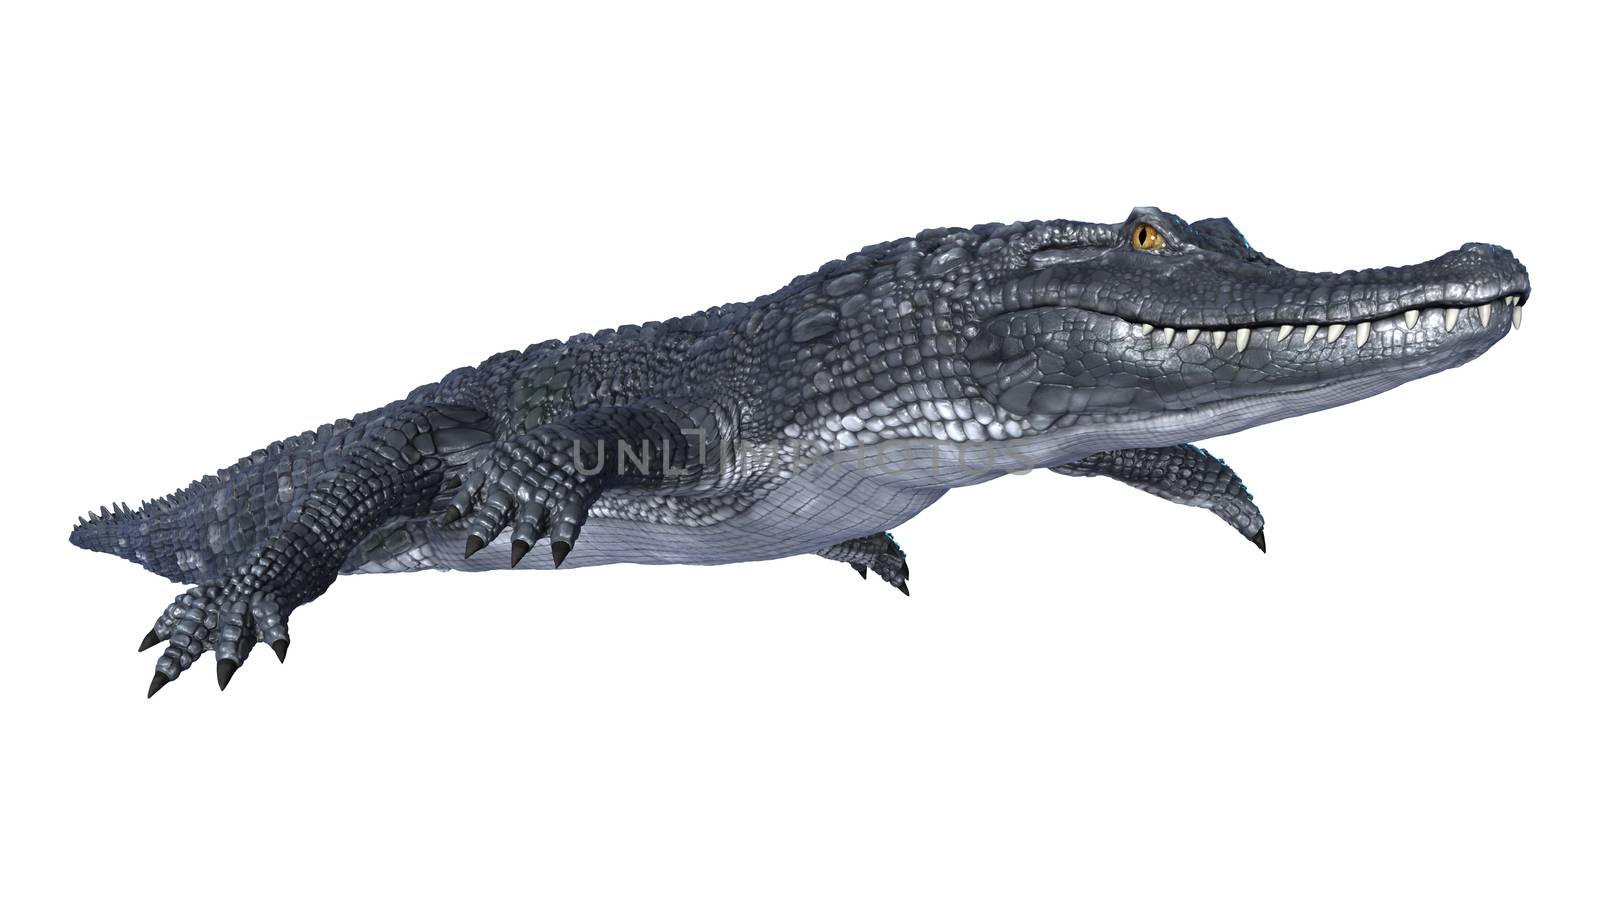 3D digital render of an alligator caiman isolated on white background